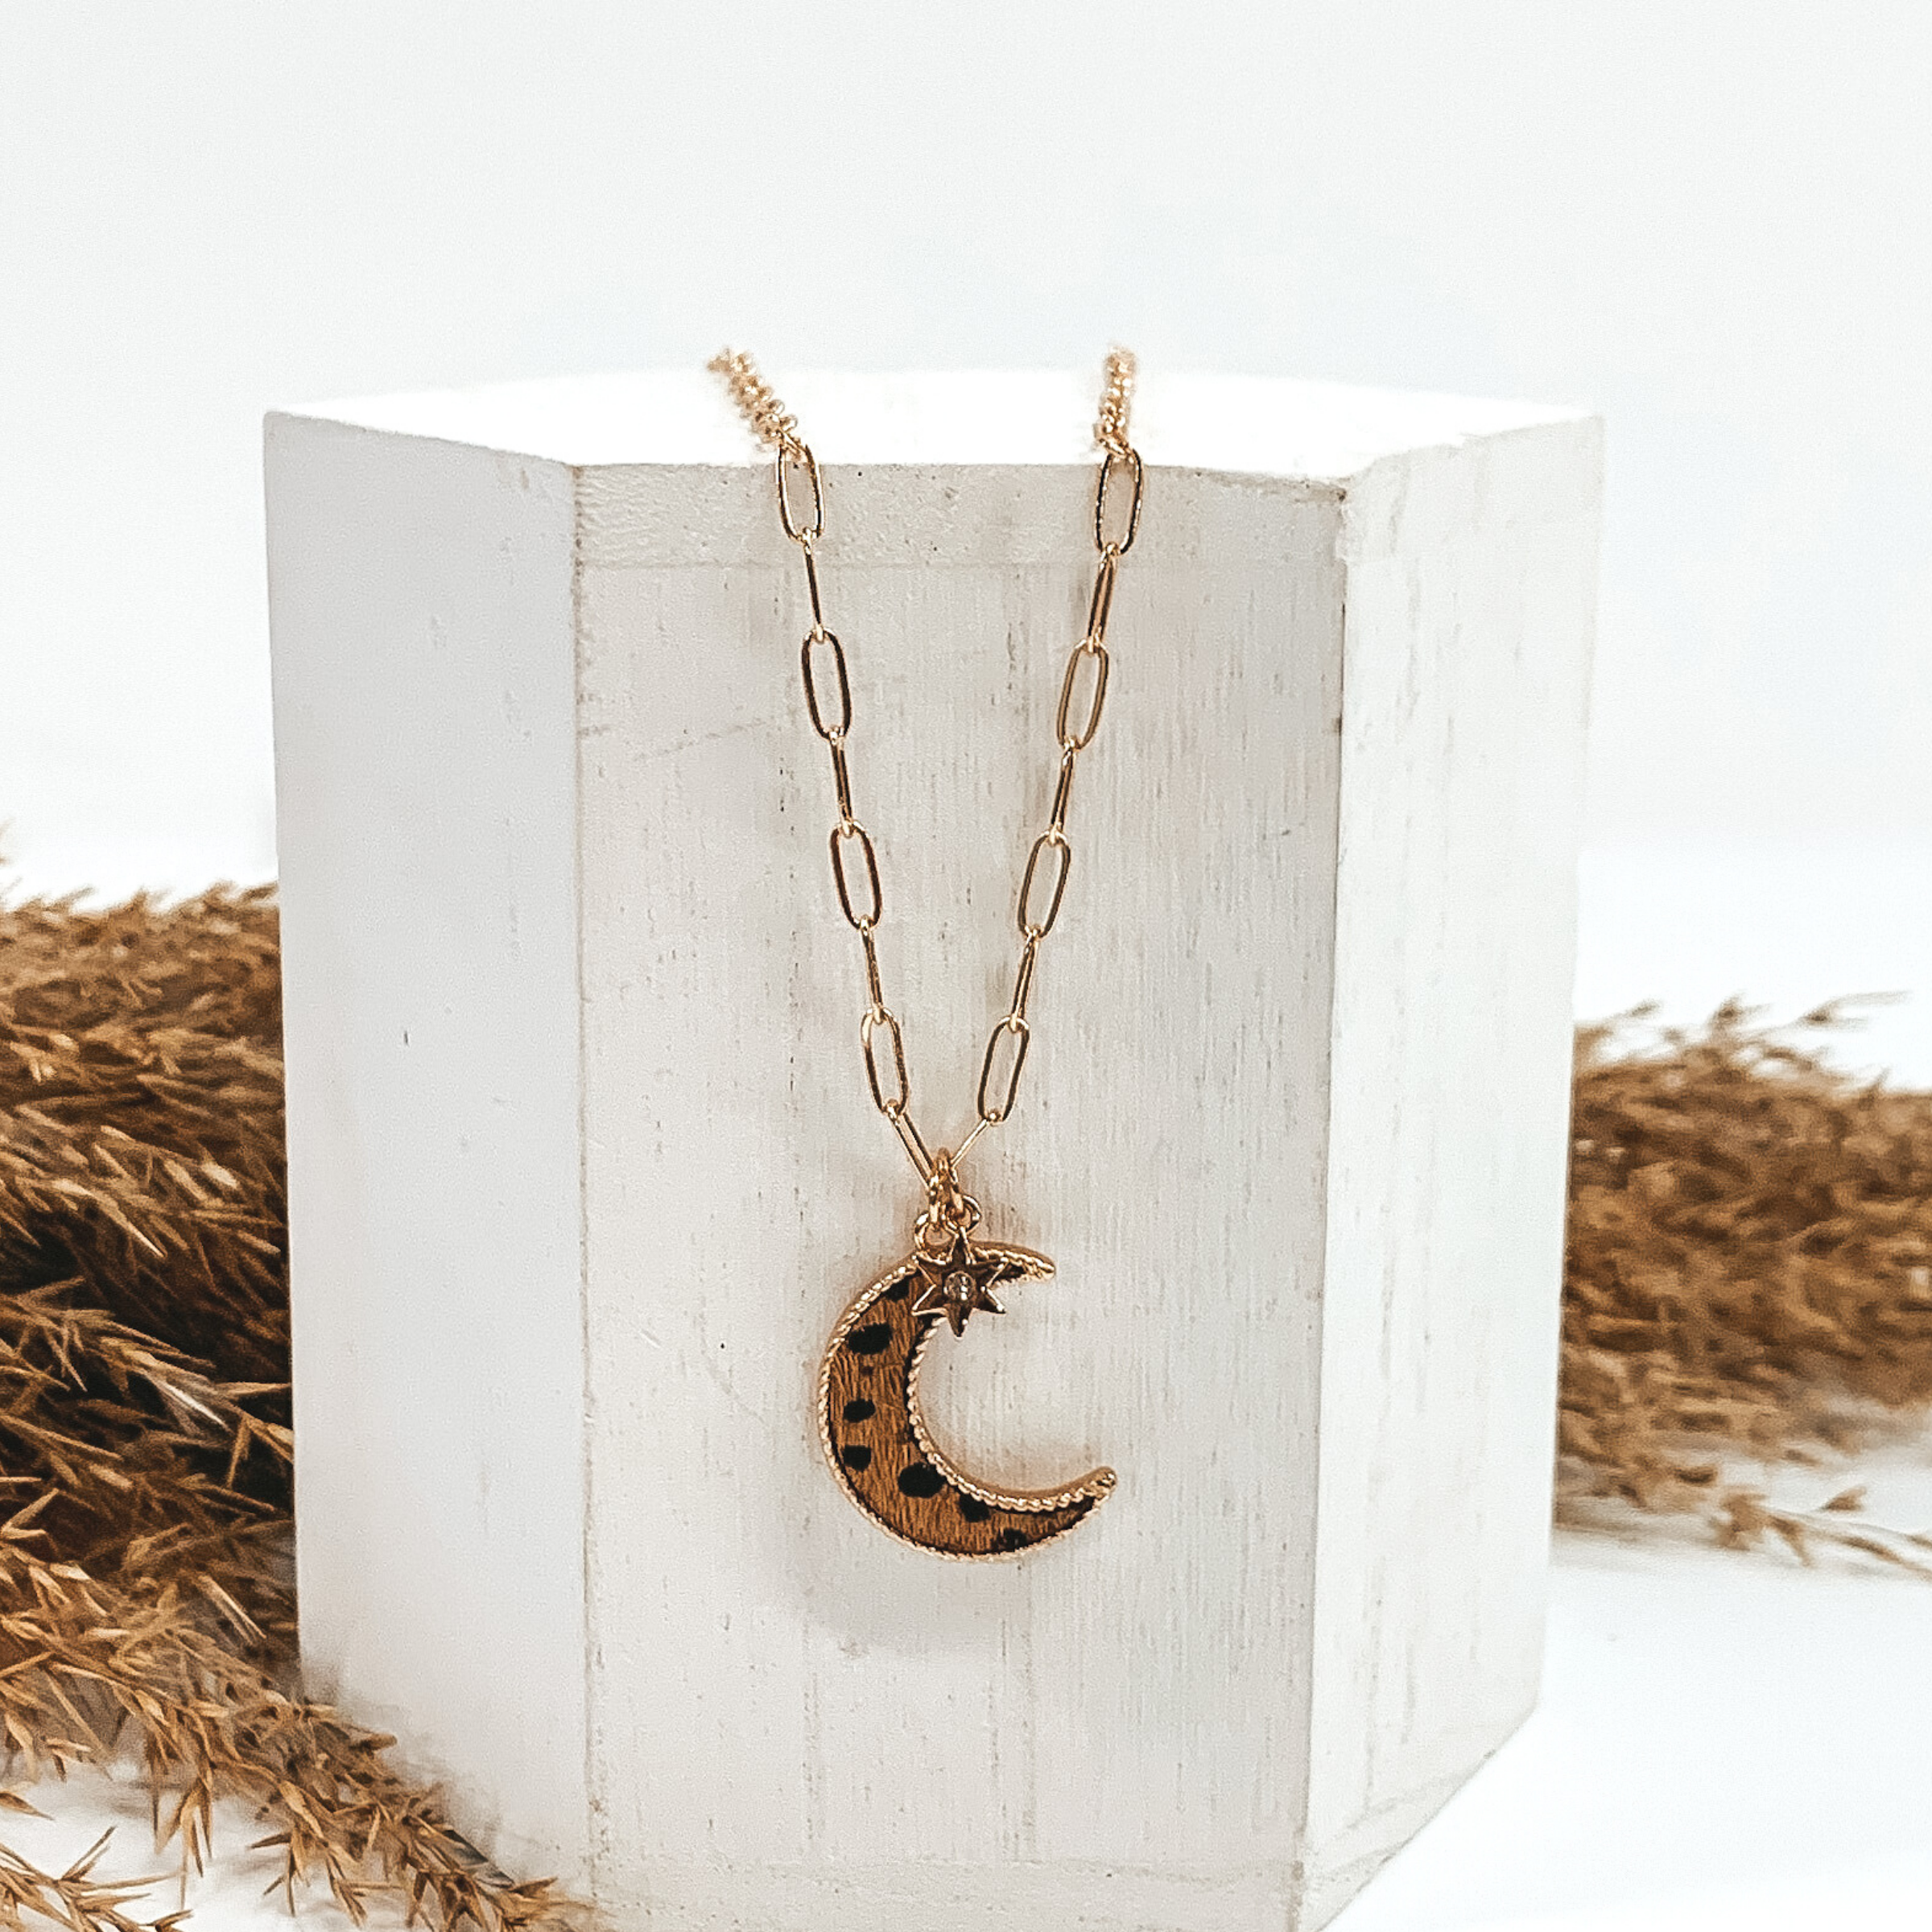 Gold Paperclip Chain Necklace with Moon Pendant and Star Charm in Brown Dotted Print - Giddy Up Glamour Boutique